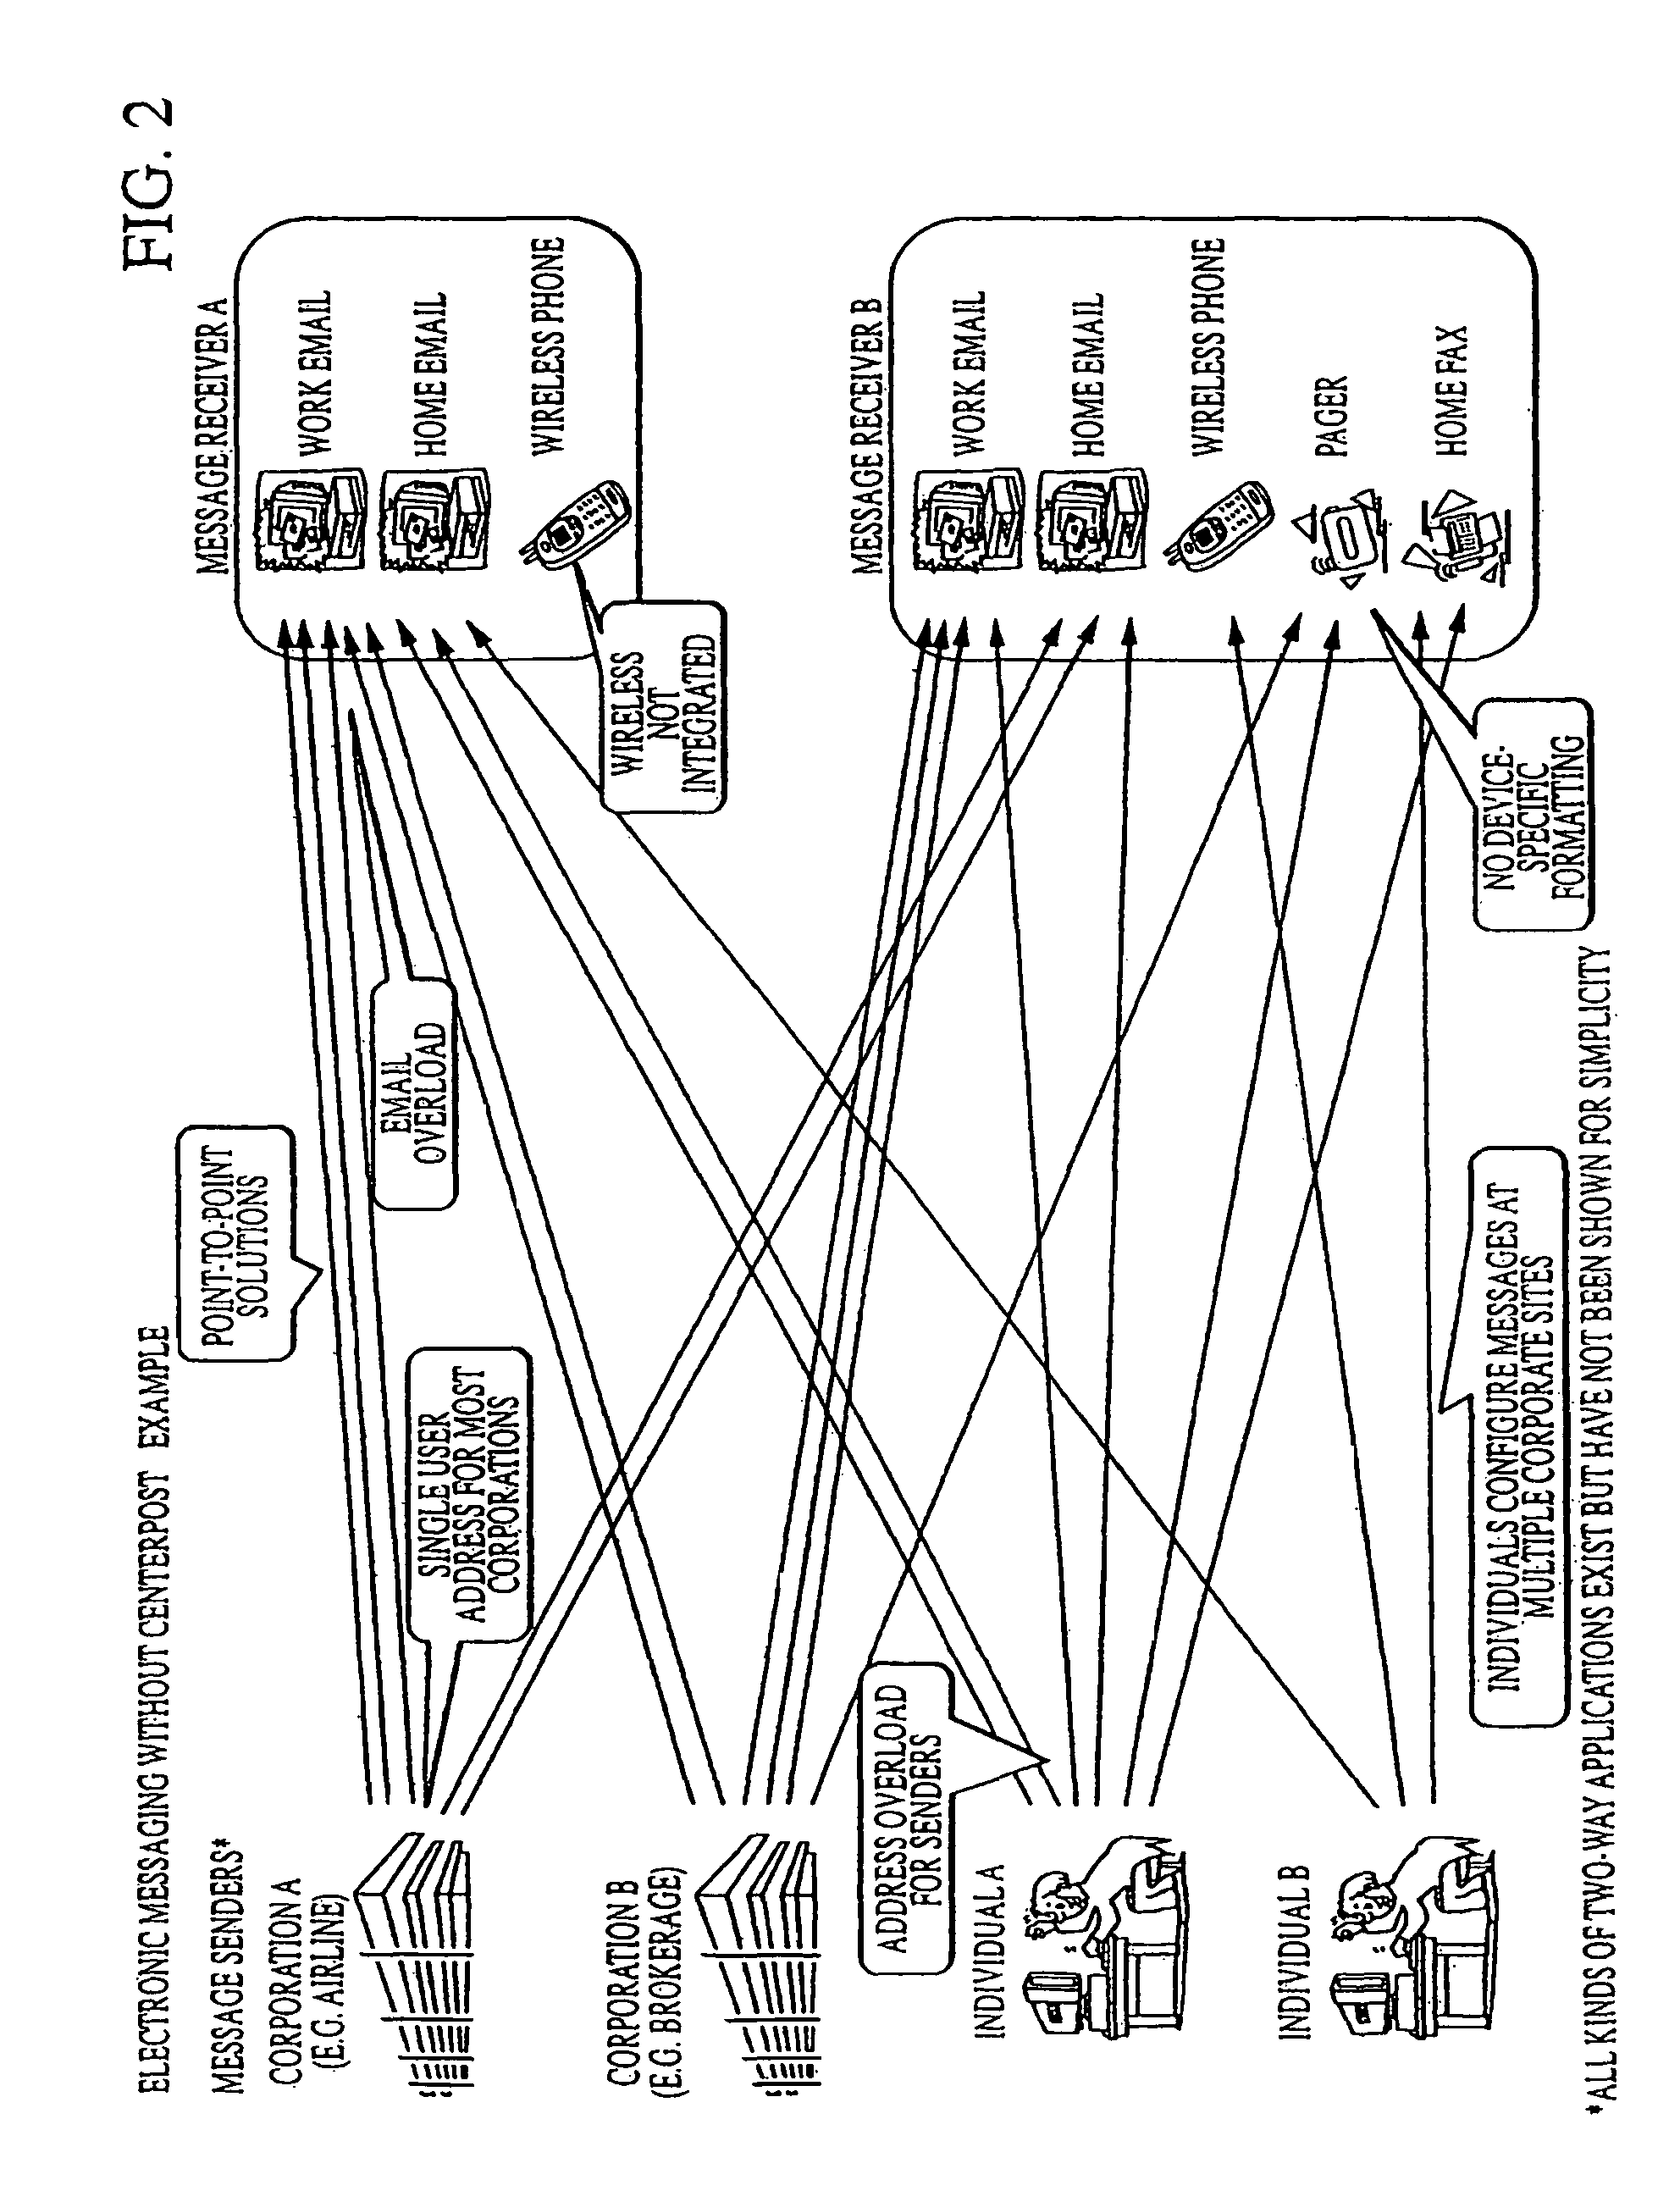 Method and system for content driven electronic messaging